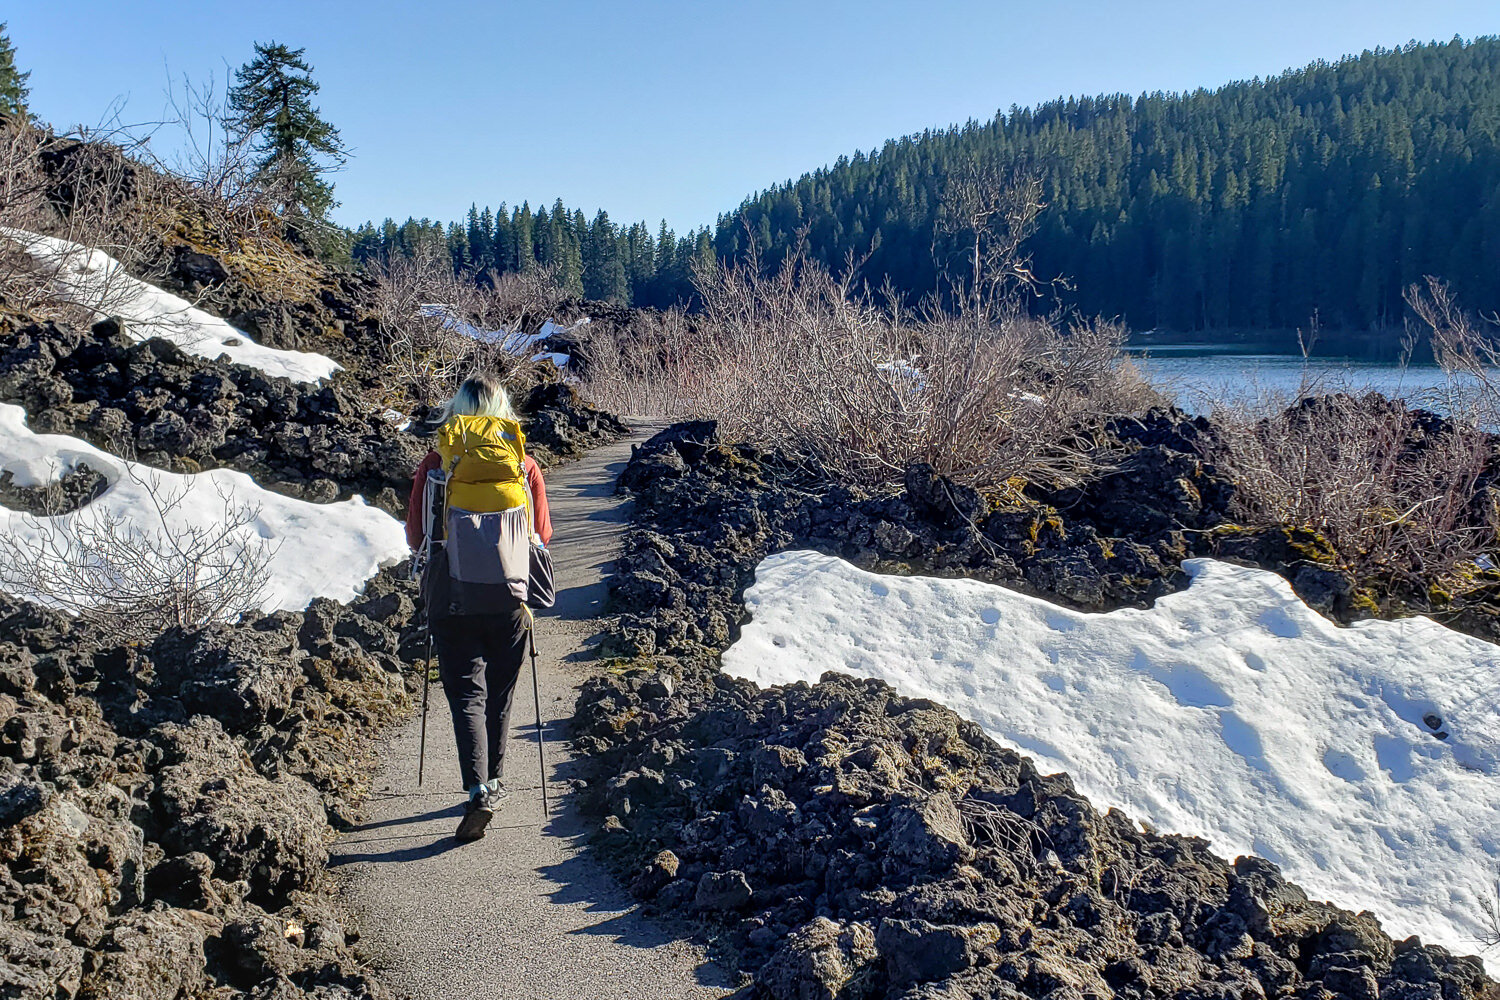 We encountered some snow on the trail in early April, but it was easy to navigate and kept crowds at bay.